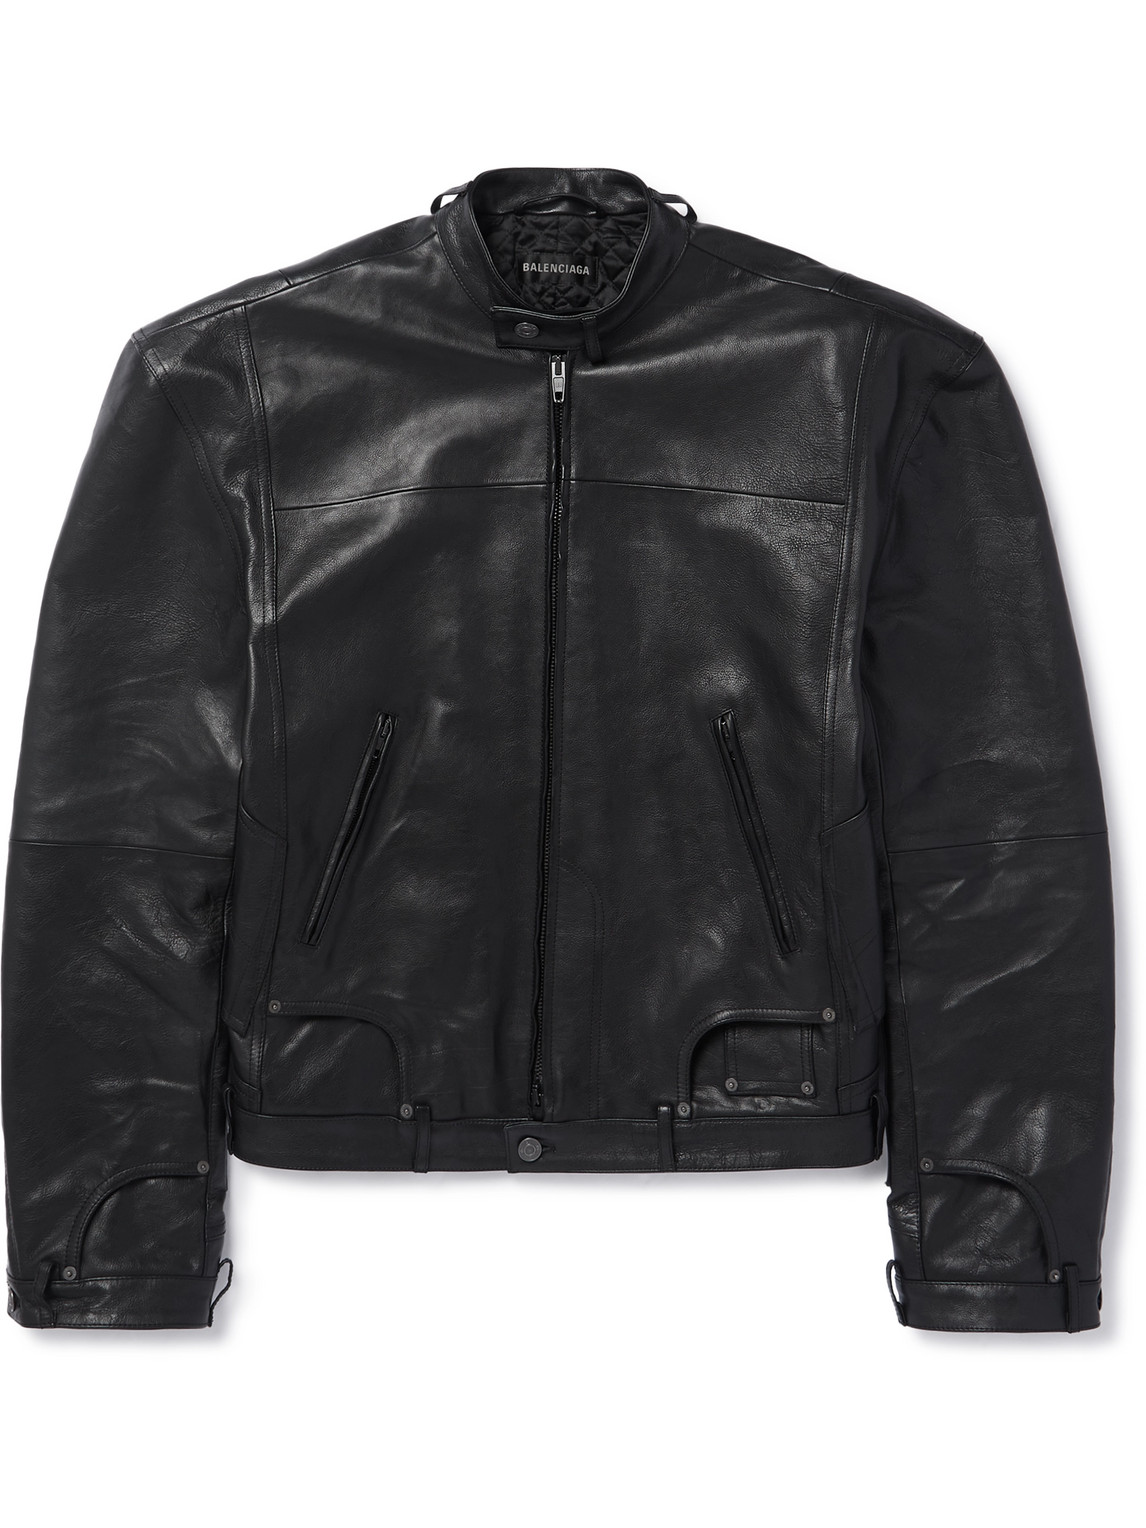 Balenciaga Deconstructed Leather Jacket In Black